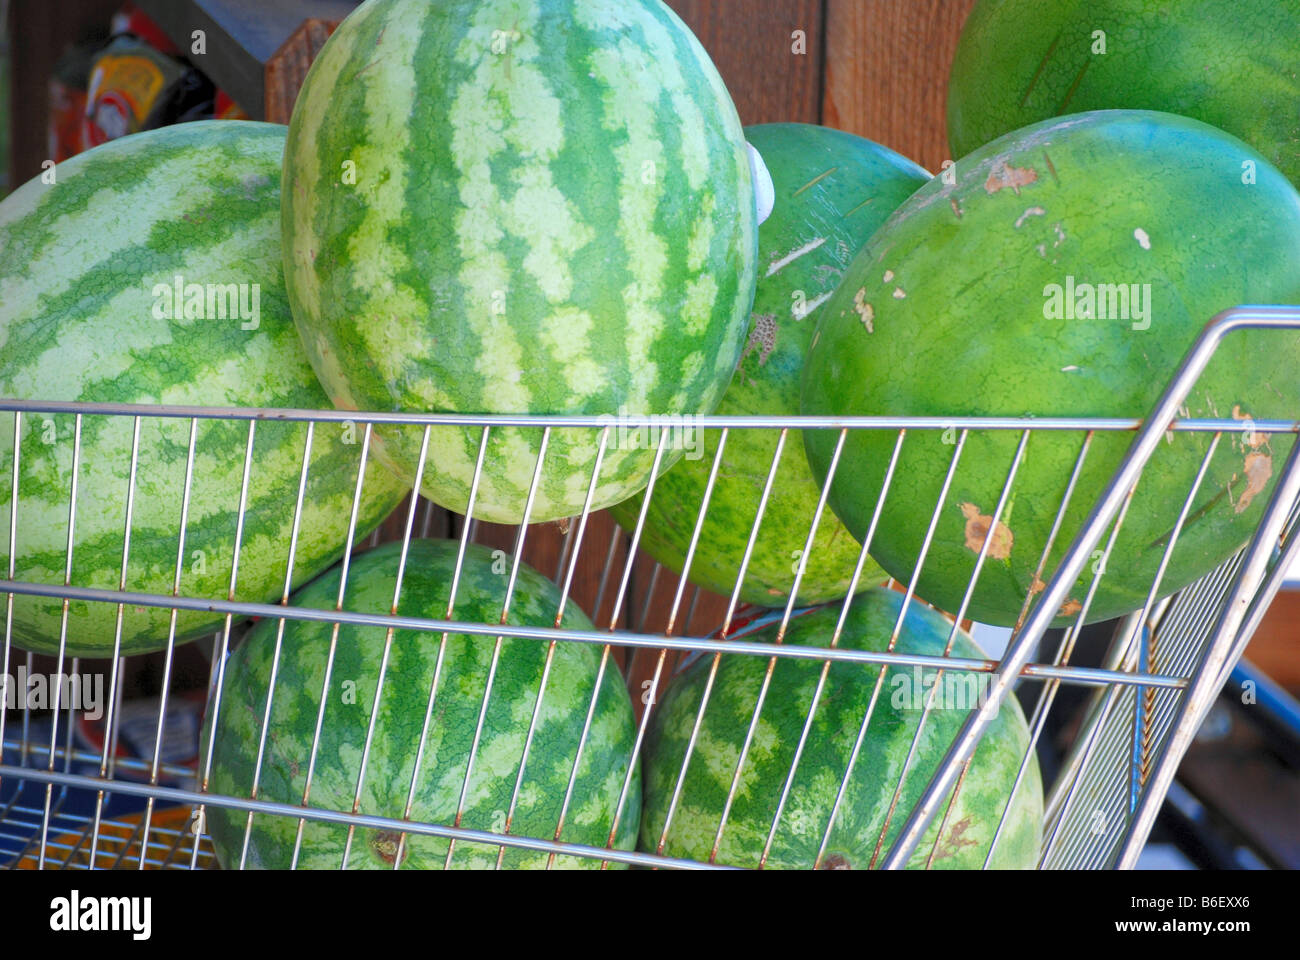 A shopping basket full of Watermelons Stock Photo